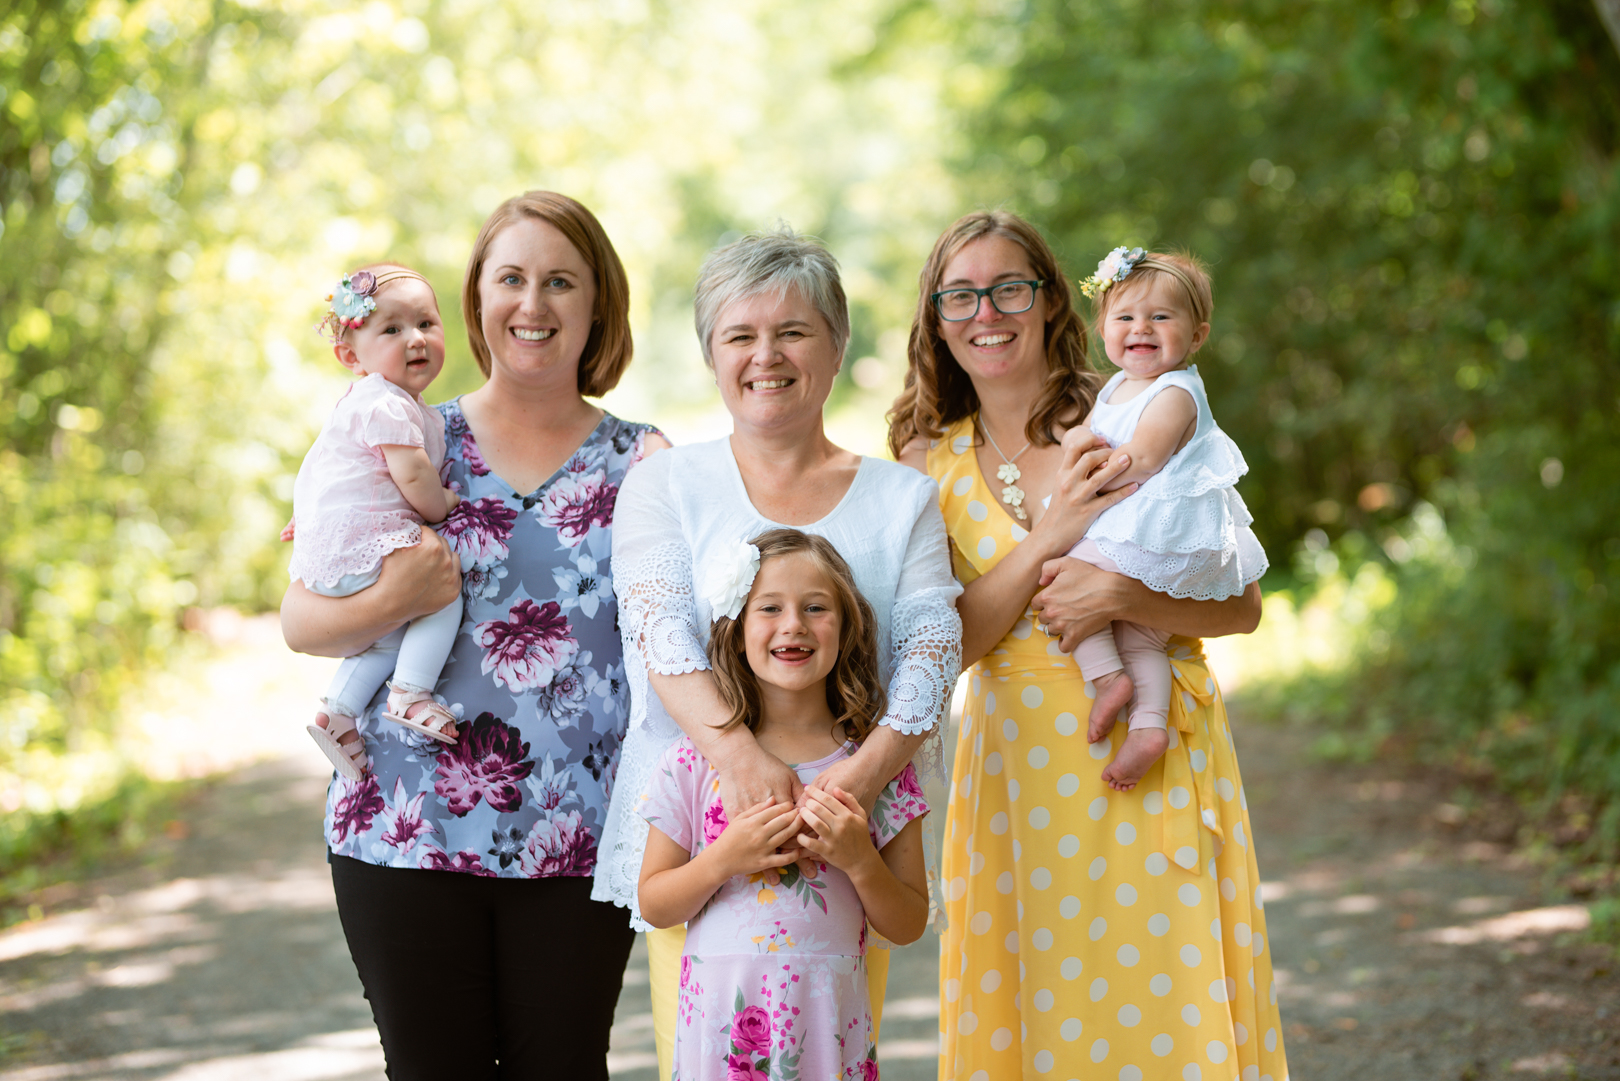 27Peterborough Photography Family Photography Naomi Lucienne082019.jpg